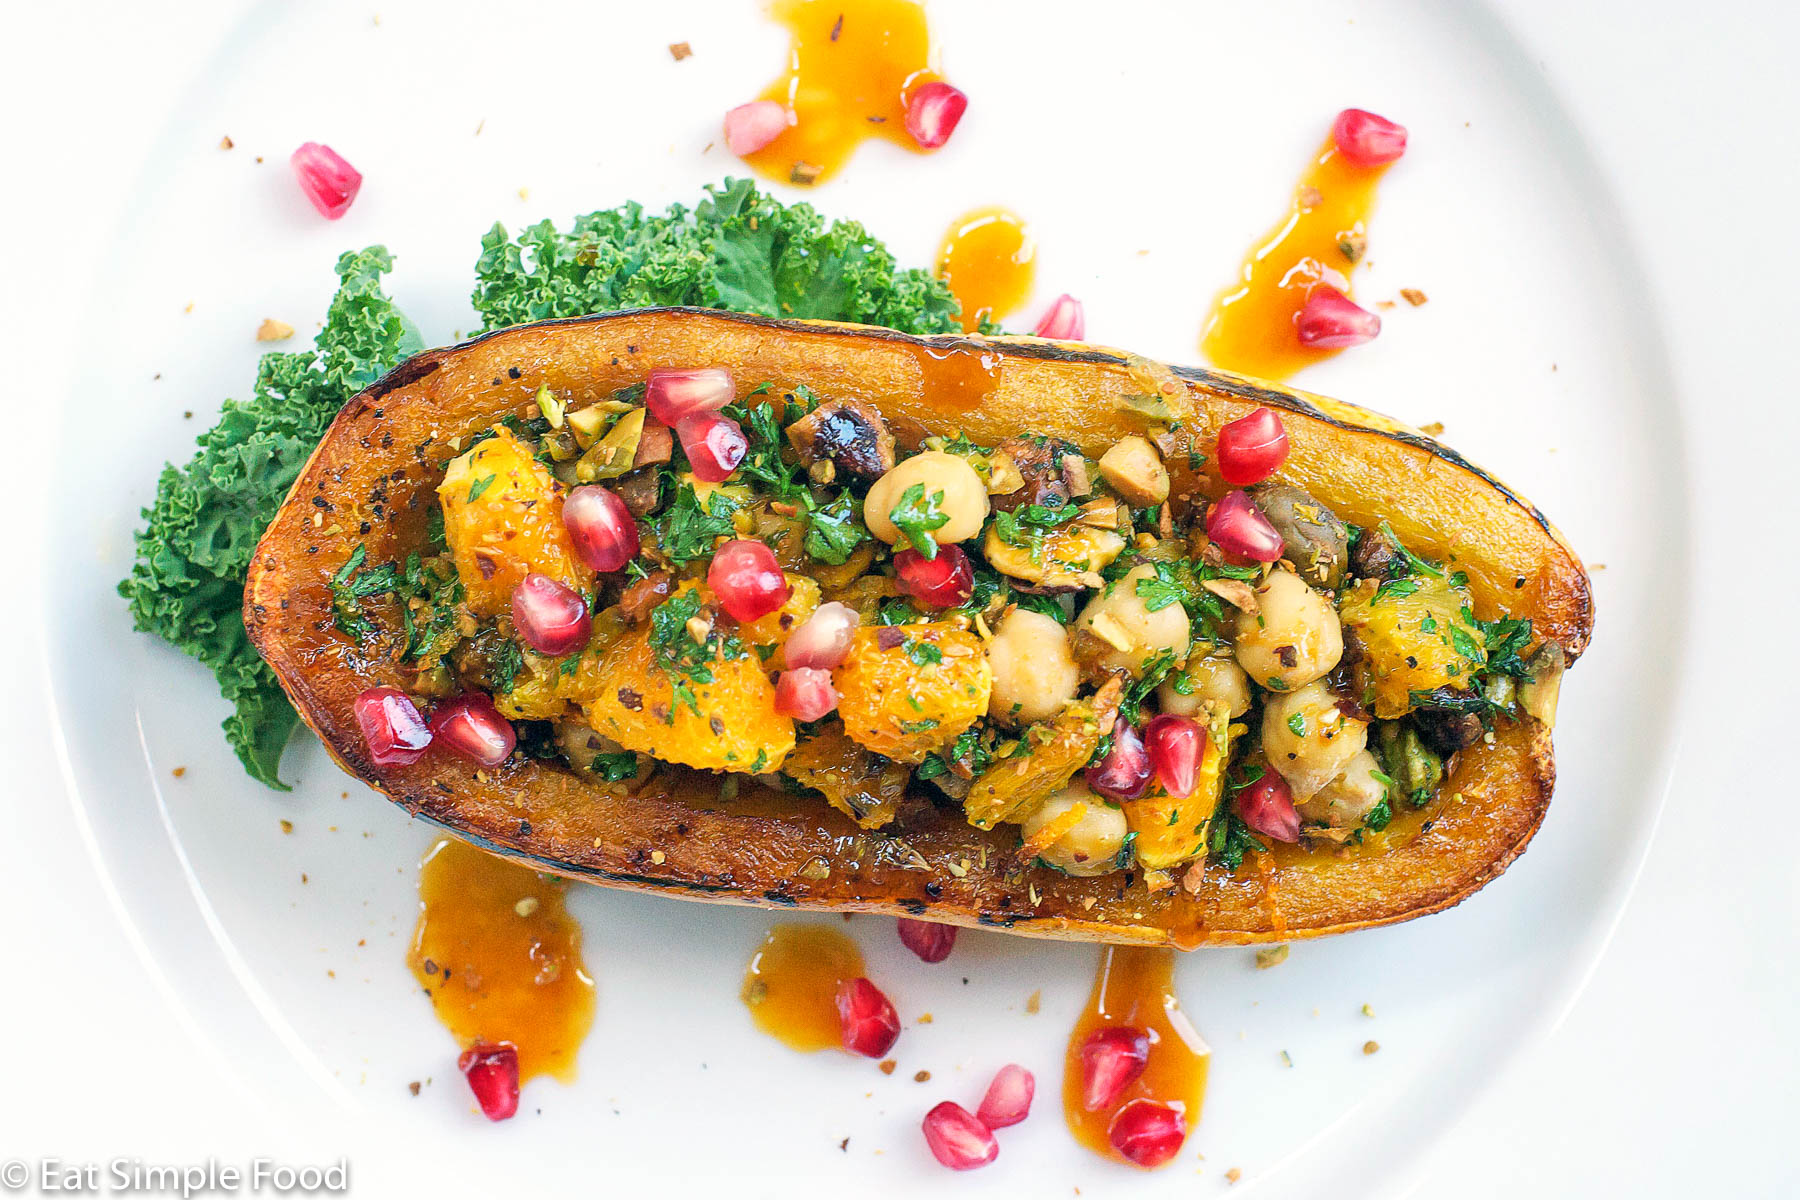 Half a delicata squash hollowed out and roasted and stuffed with parsley and pistachio pesto and garnished with pomegranate kernels on a white plate with orange sauce.